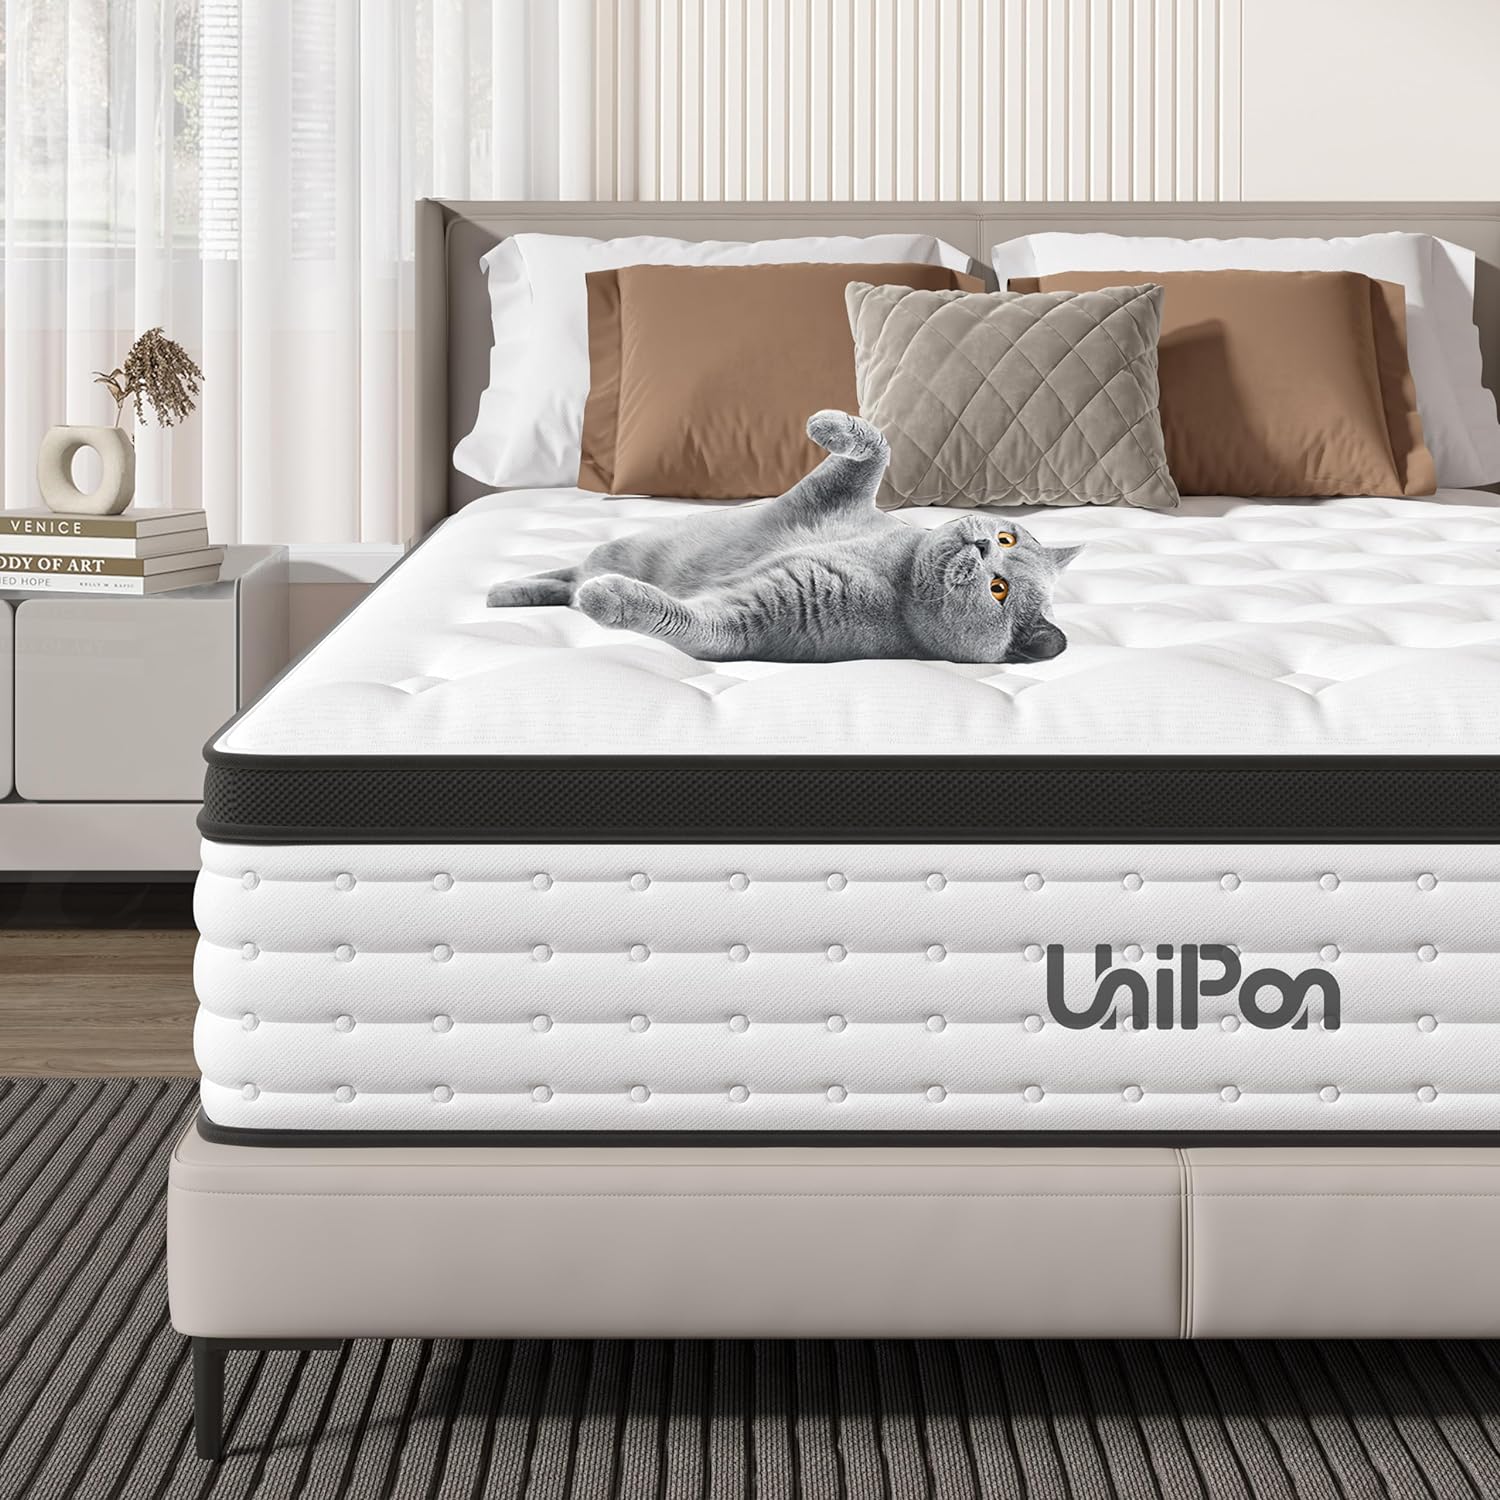 UniPon 12 Inch Hybrid Mattress King, Spring Mattress with Gel Memory Foam, Medium Firm Mattress, Made in USA, Supportive Individually Pocket Spring Mattress, Bed in a Box, Pressure Relief